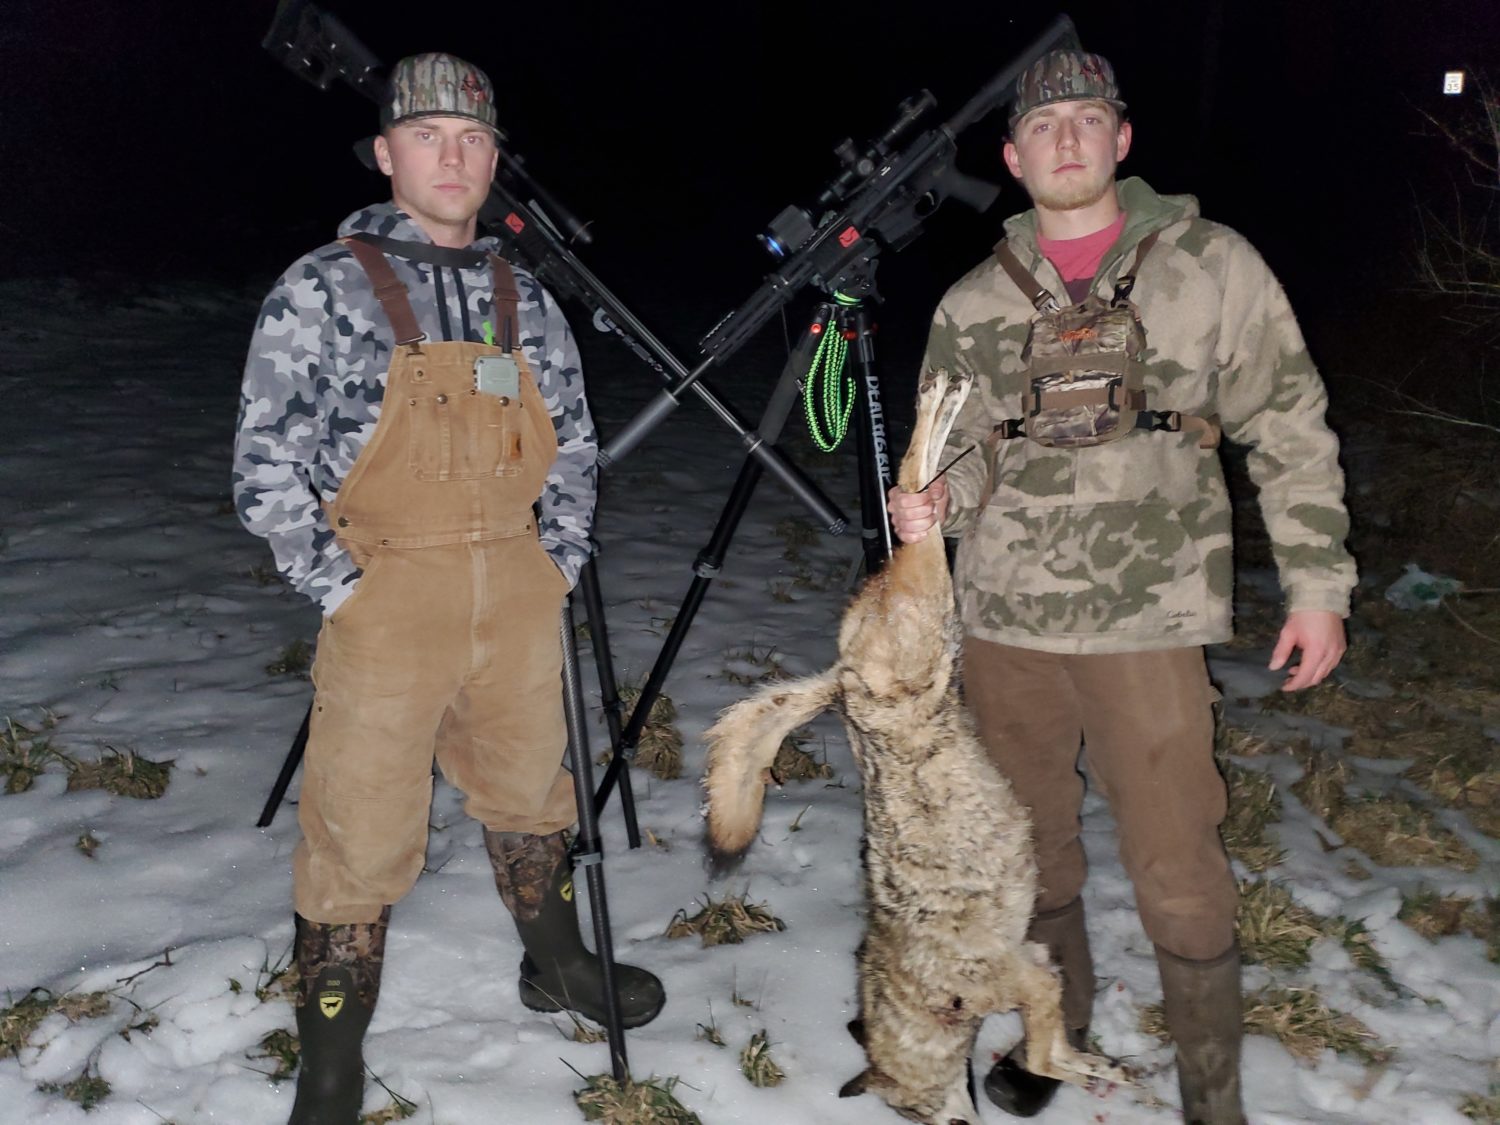 Tyler Sams (on left) and Connor Boothe hunting coyotes in West Virginia